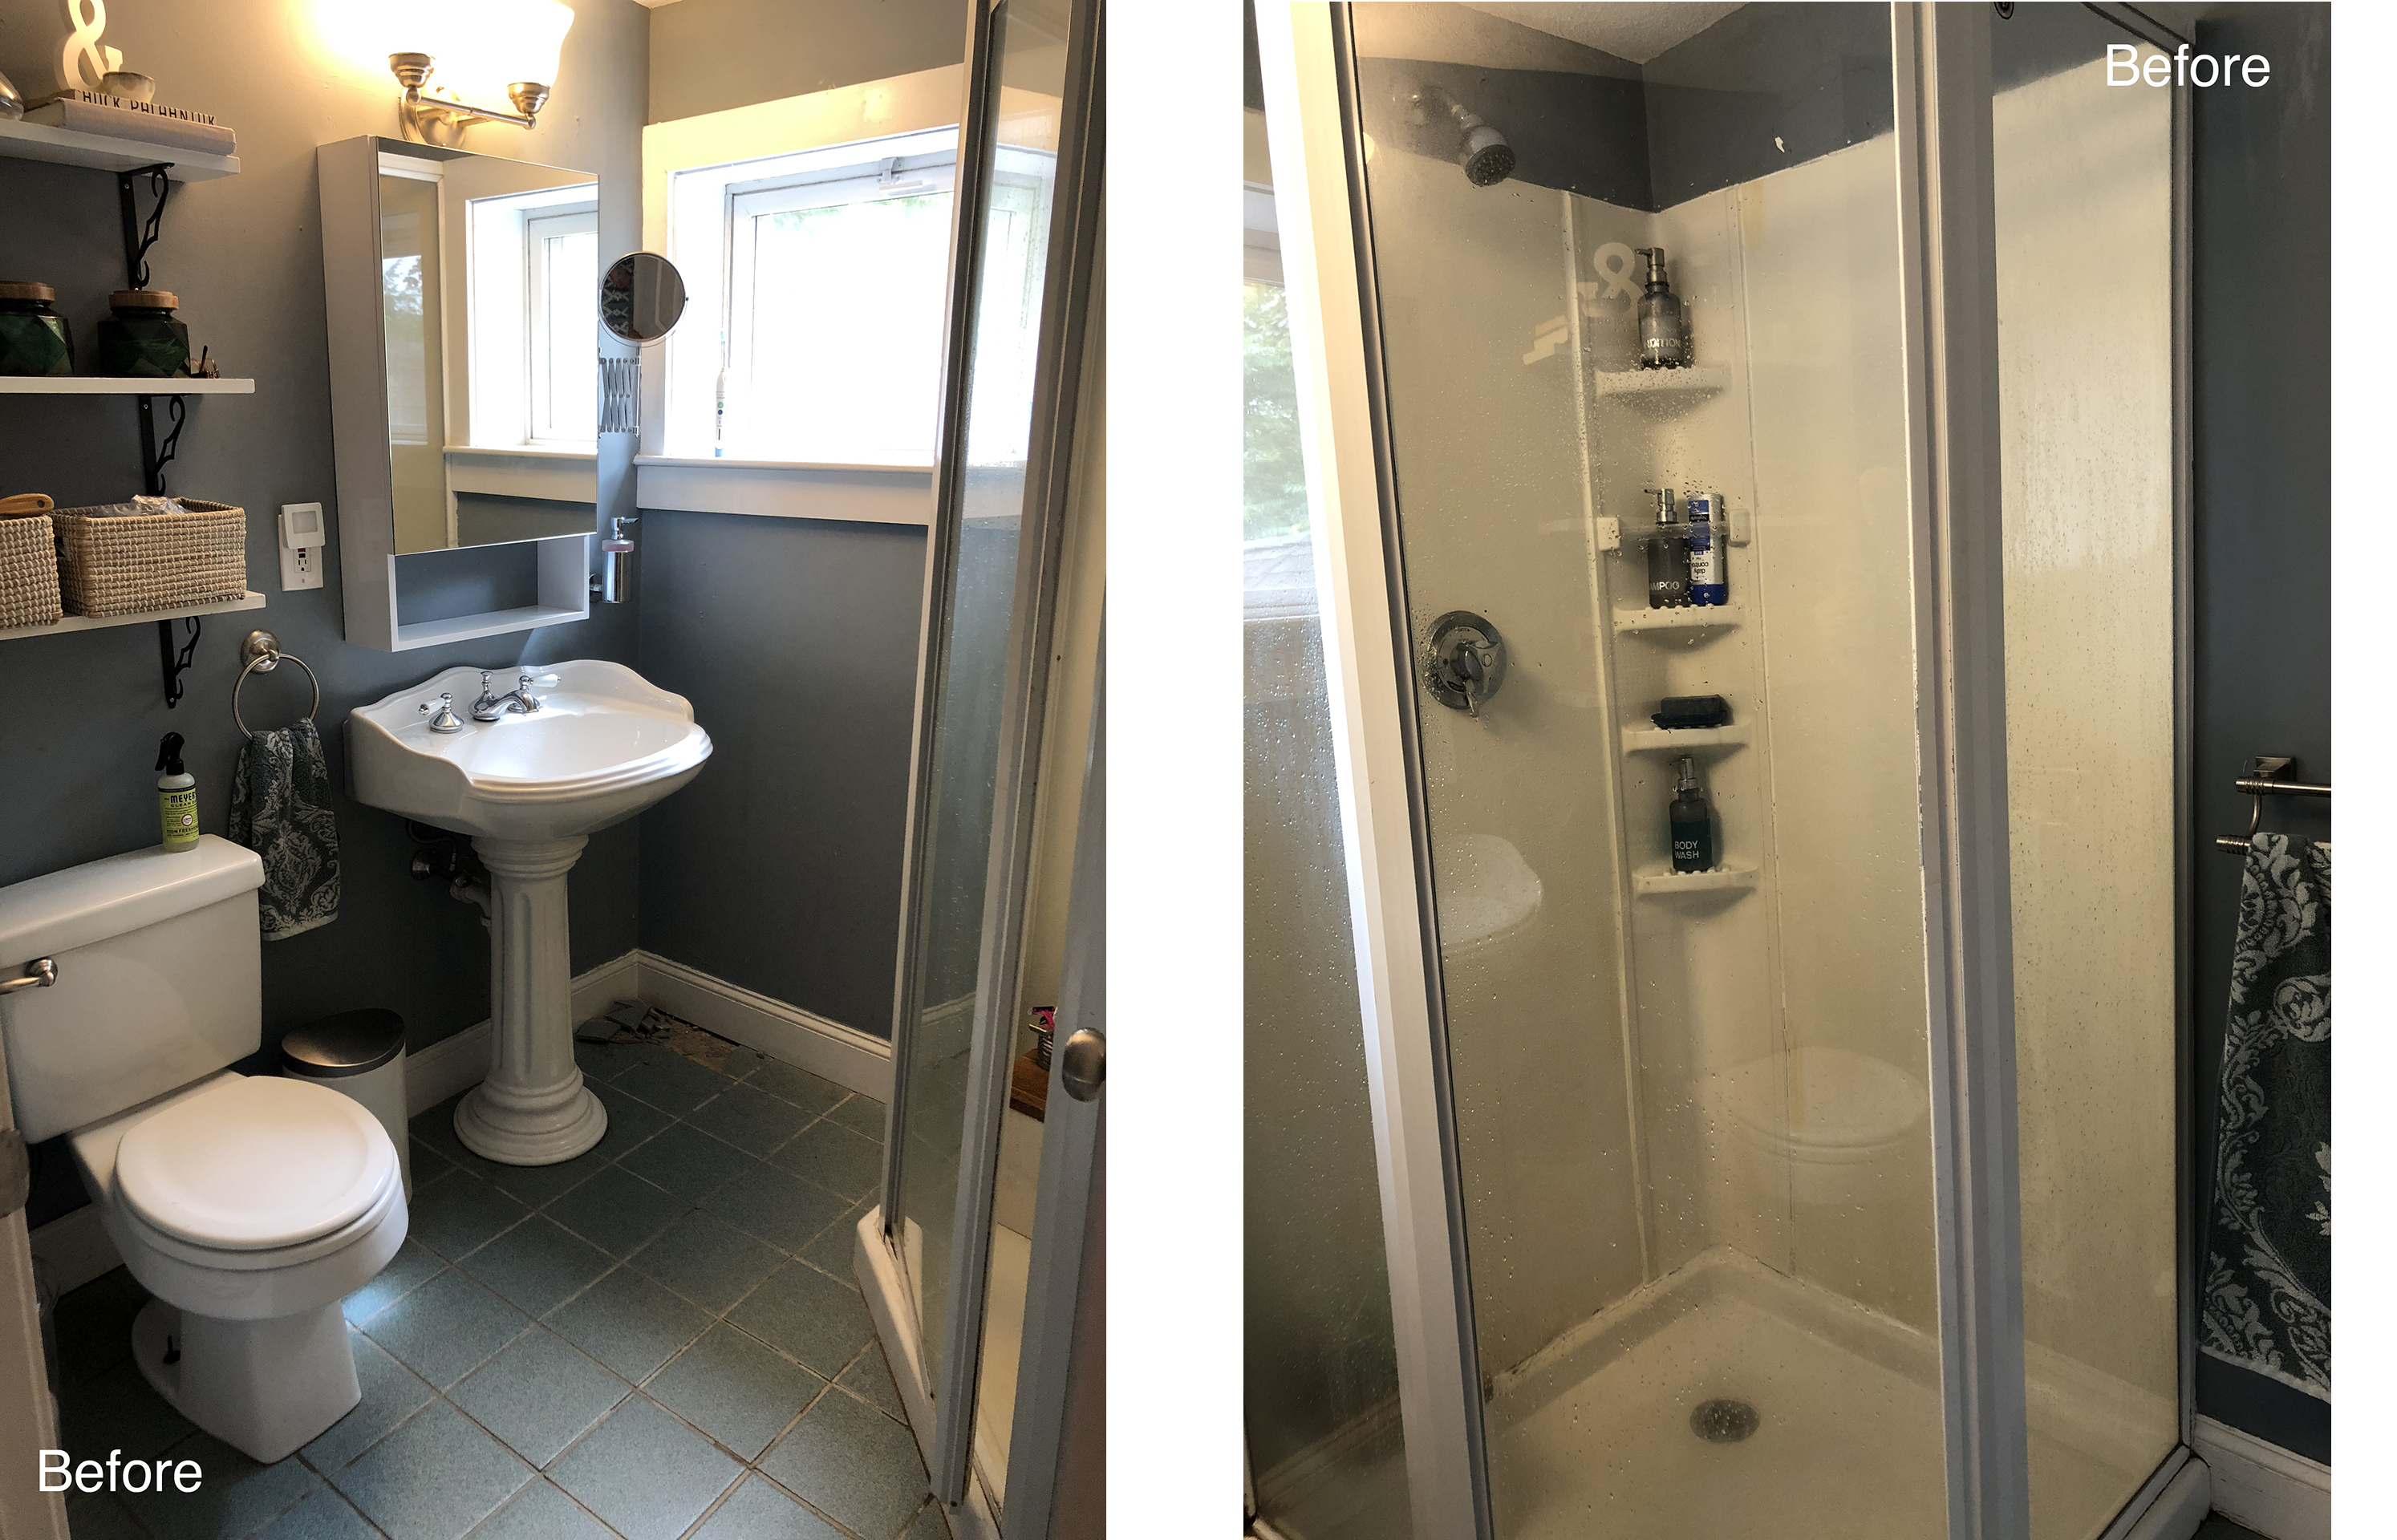 One Room Challenge: How To Maximize A Small Bathroom /// By Design Fixation #renovation #bhgorc #oneroomchallenge